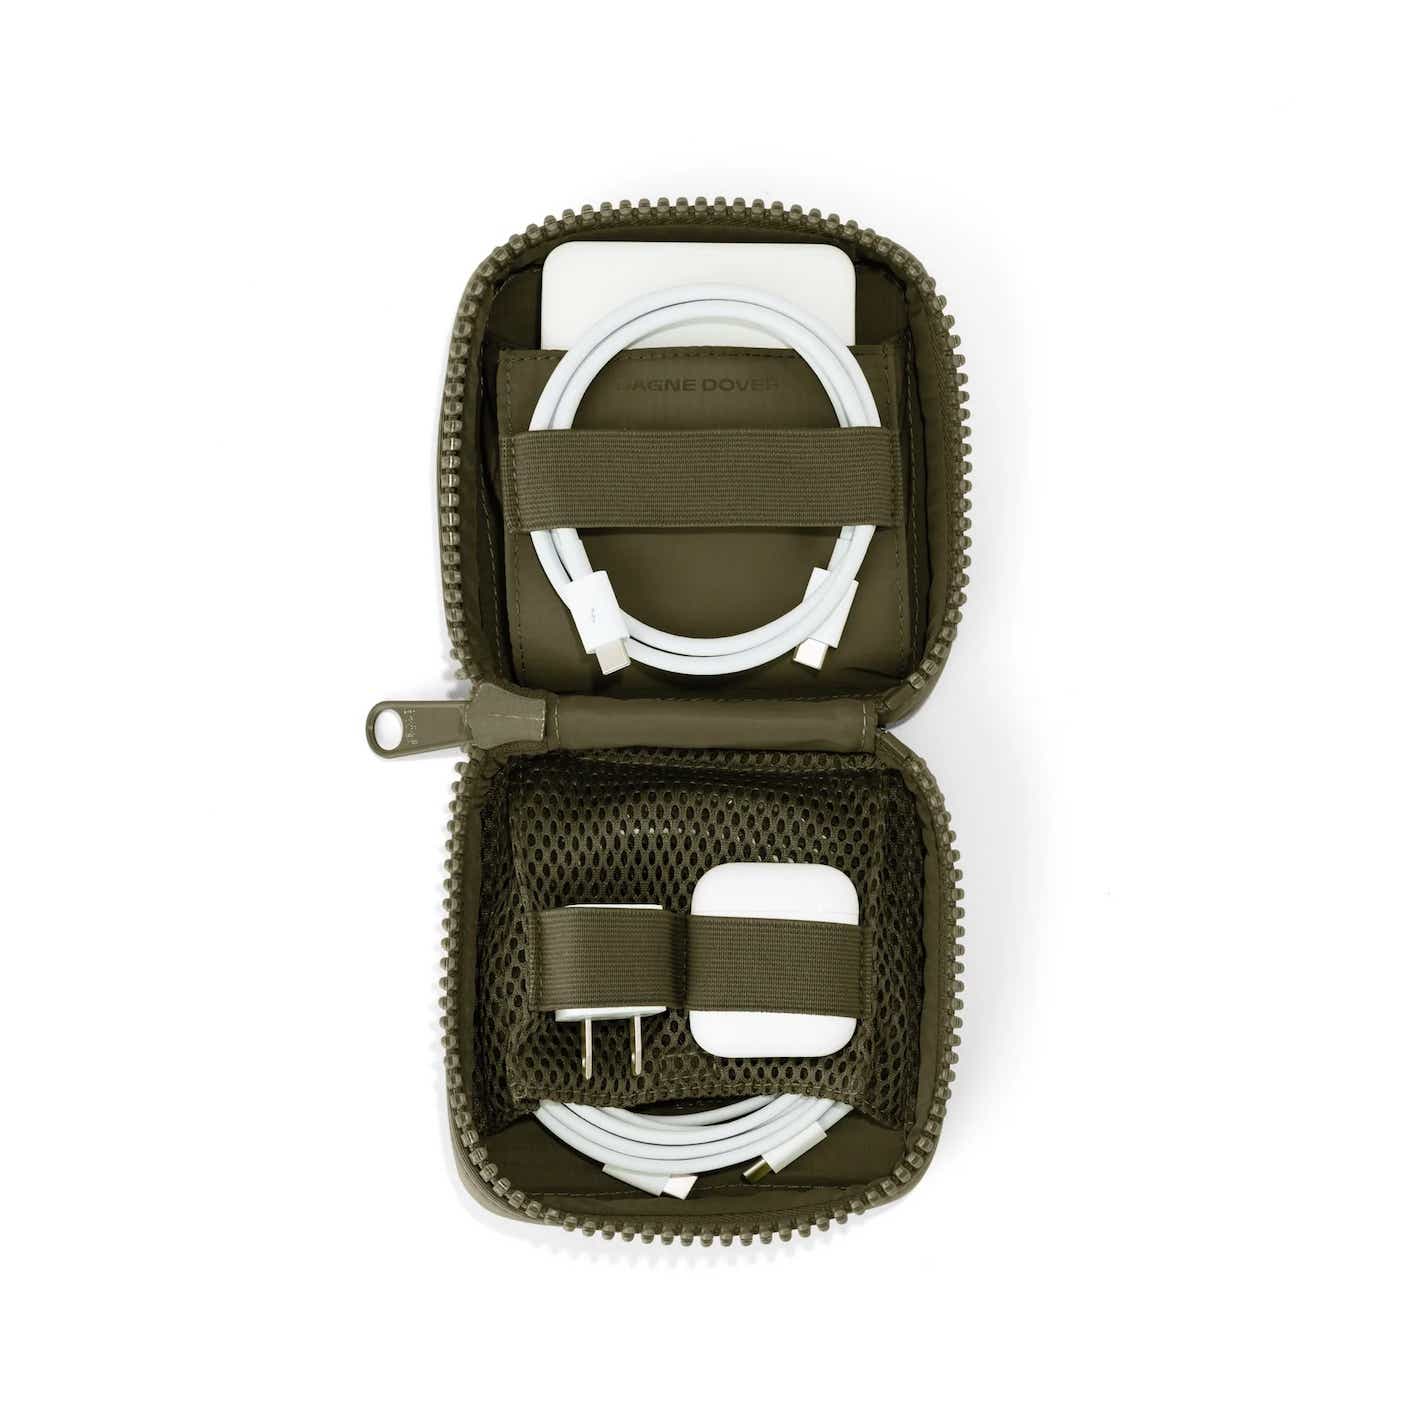 A moss green, square tech organizer is zipped open, showing its contents (organized chargers and cords).